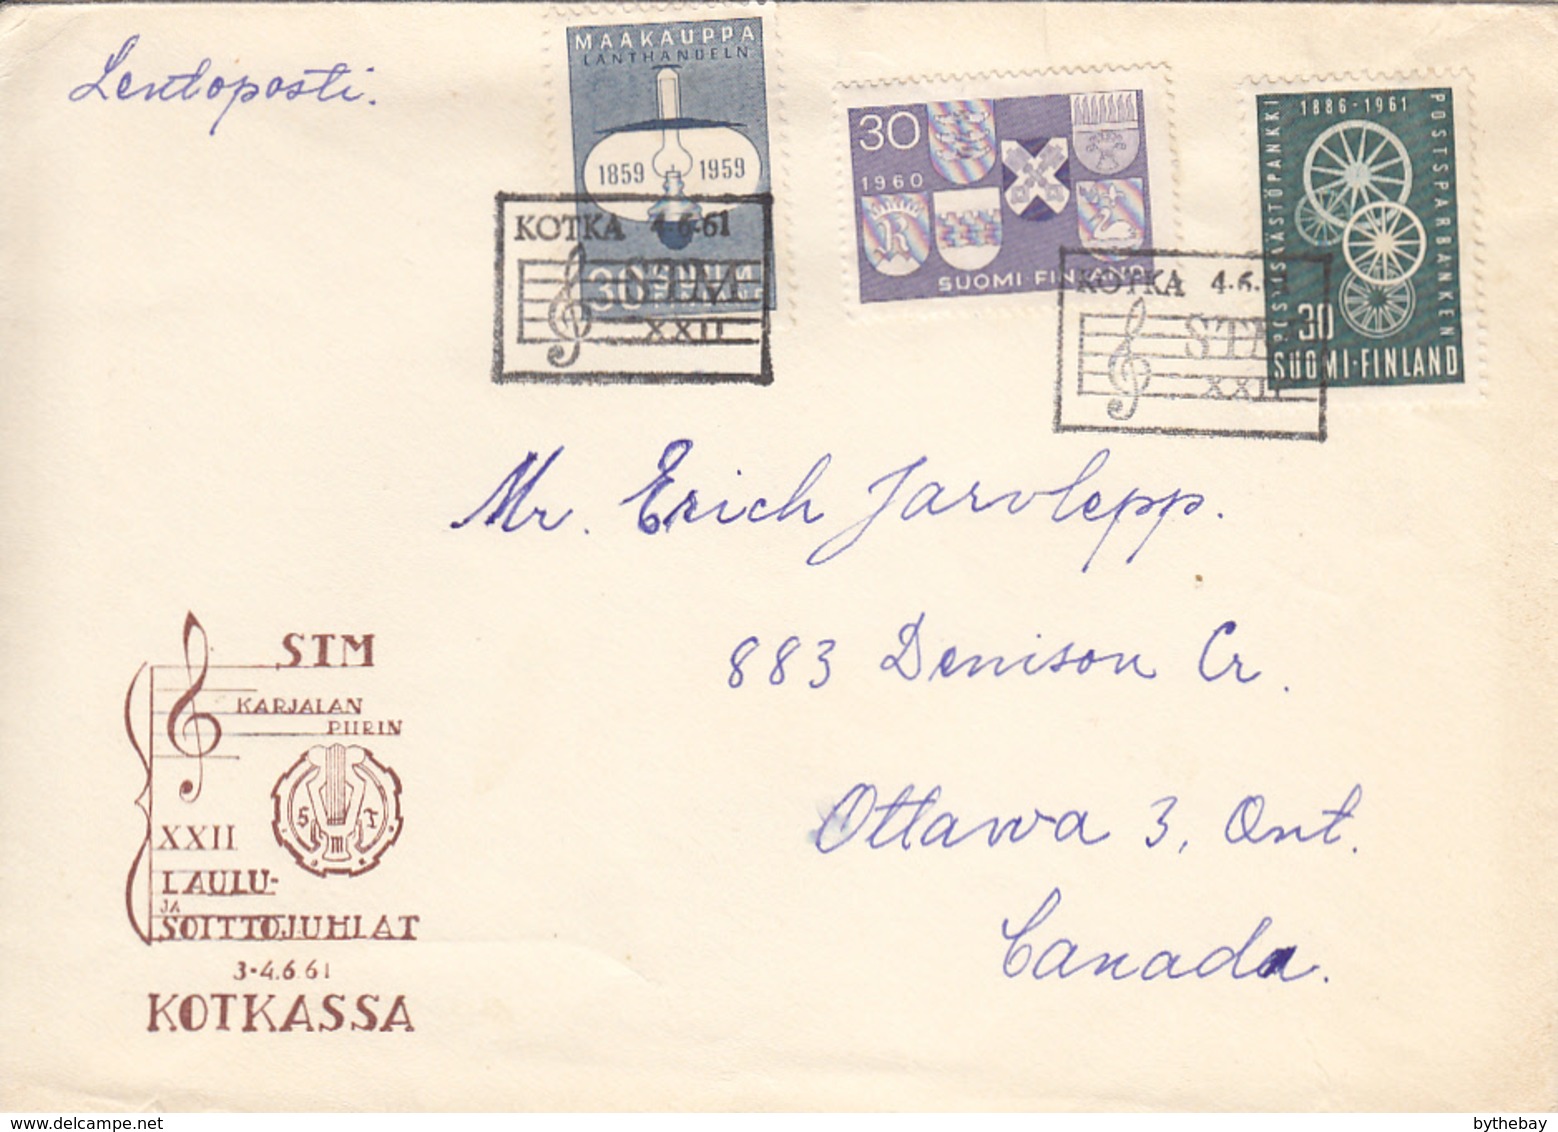 Finland 1961 To Canada Cover Sc #364, #366, #382 Kotka 4-6-61 Music Cancellation - Lettres & Documents